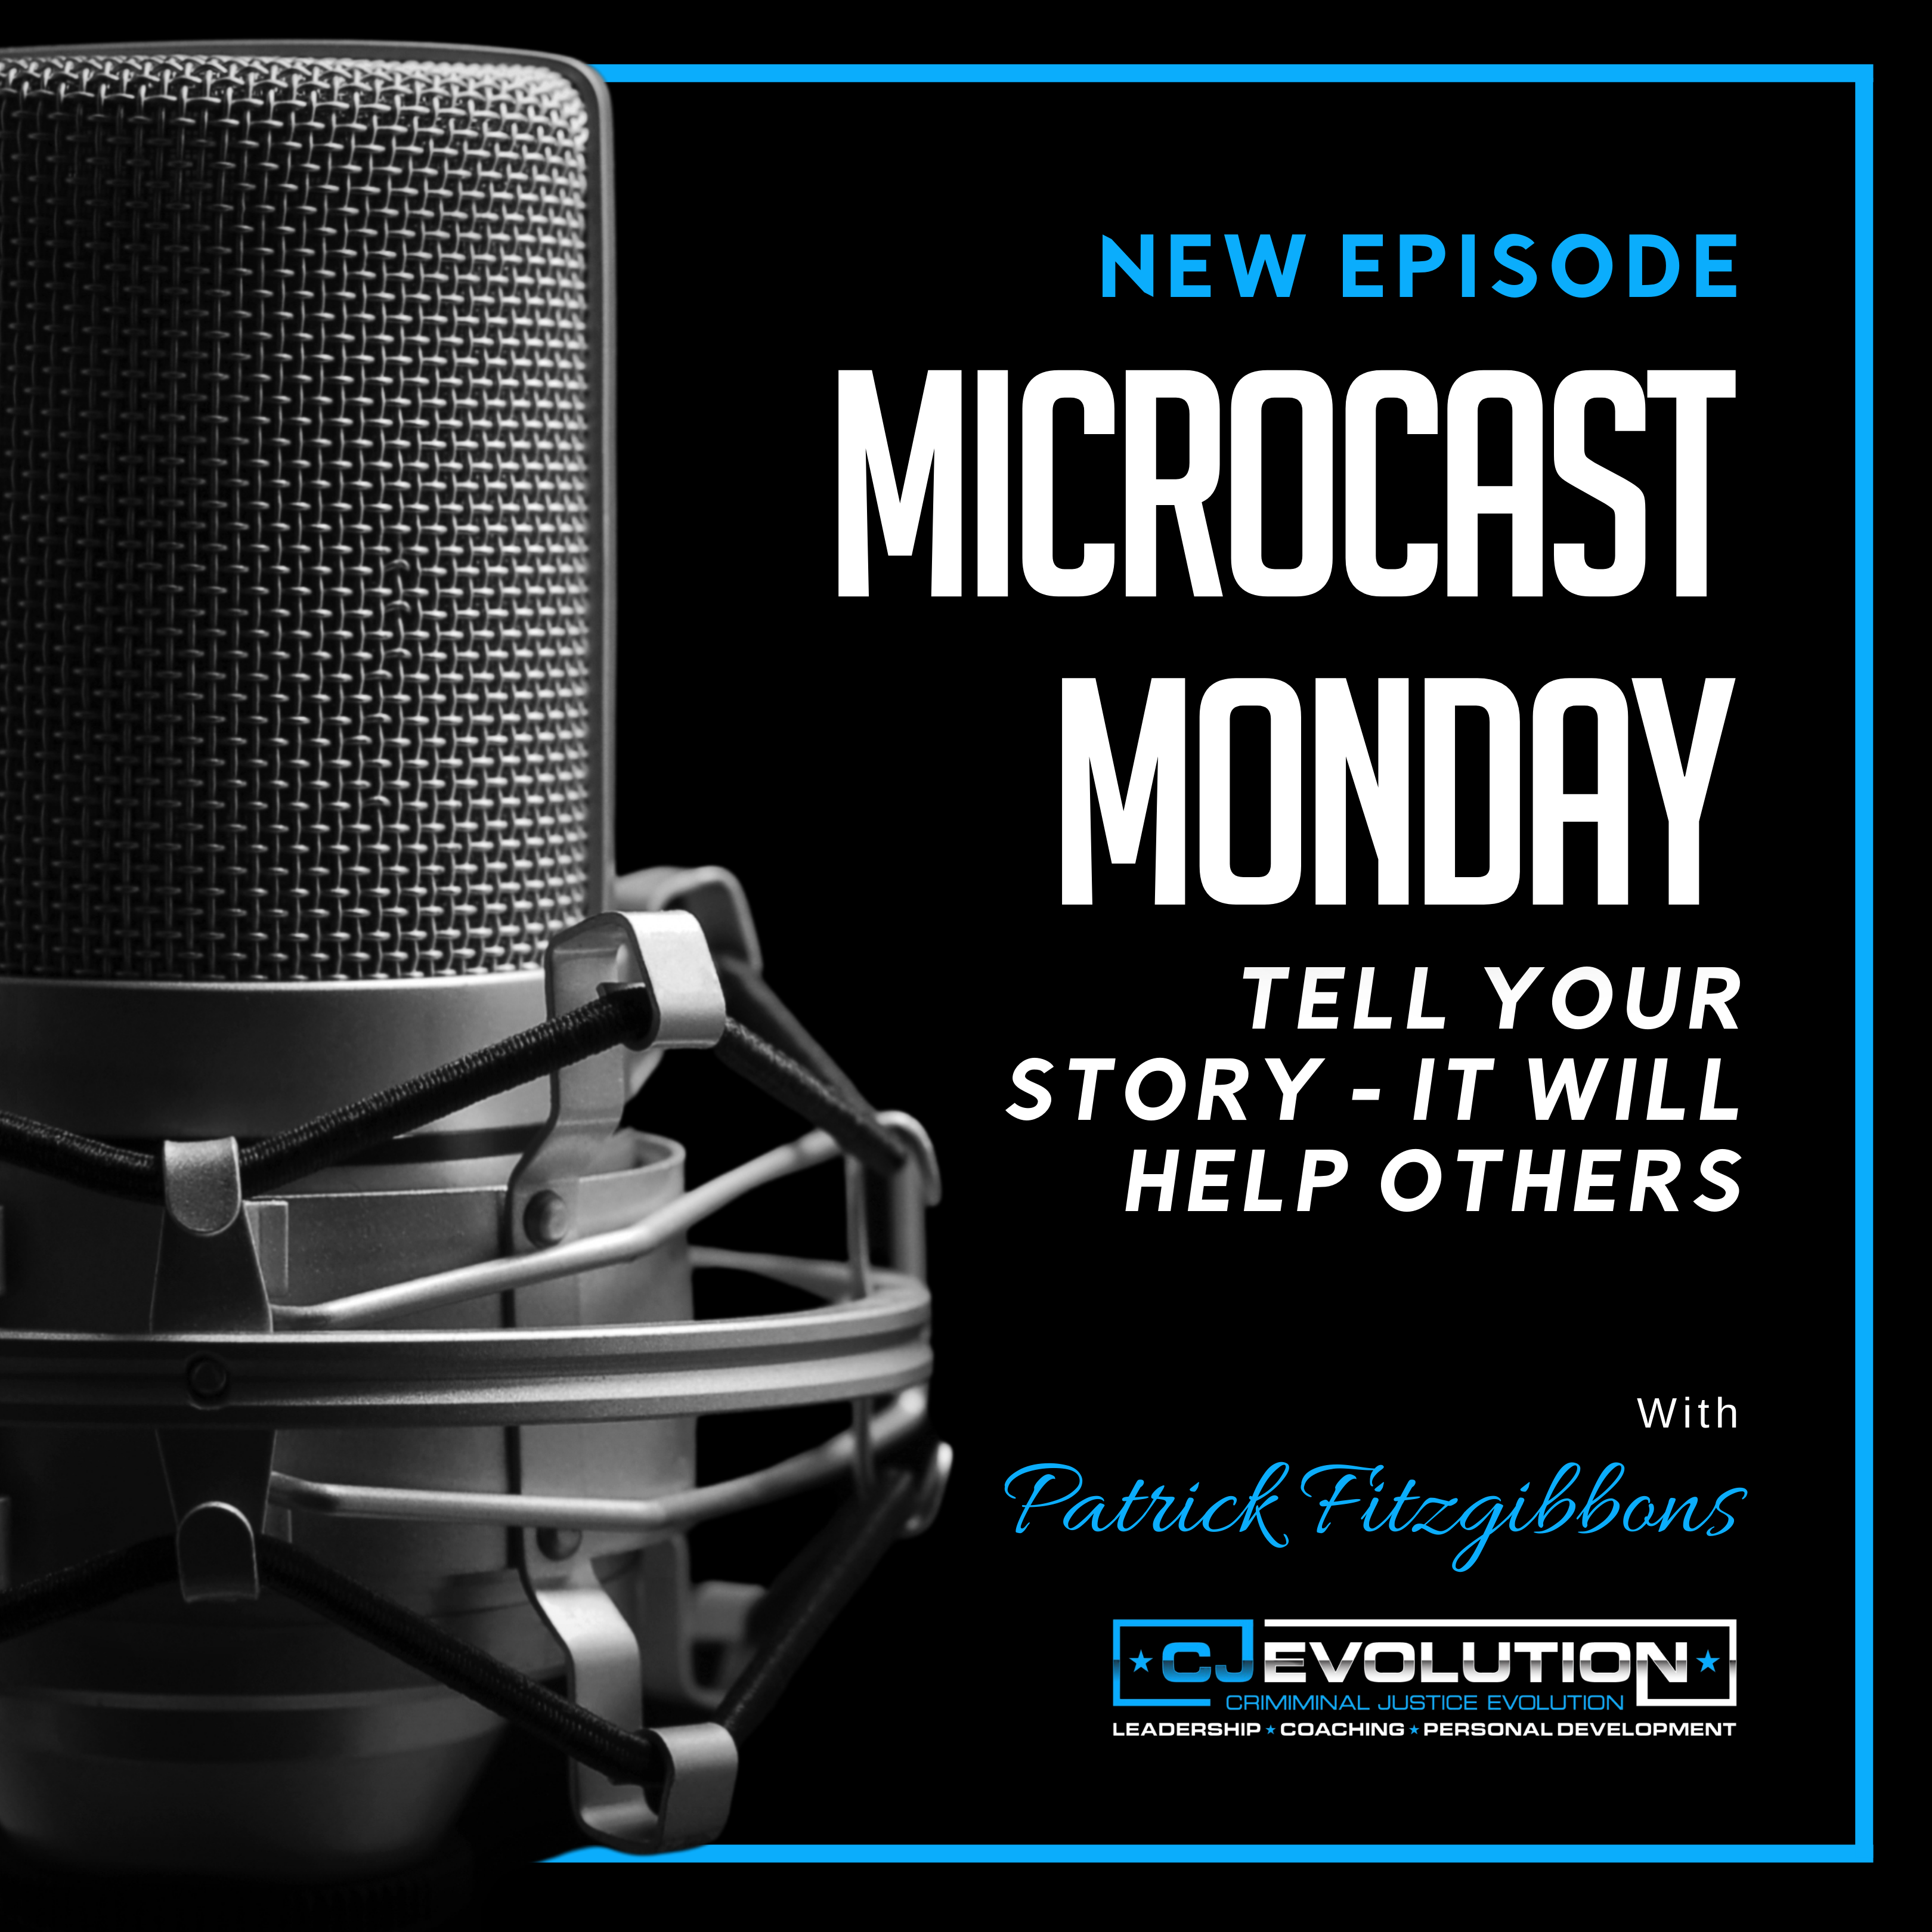 Microcast Monday #138 – Tell Your Story – It Will Help Others